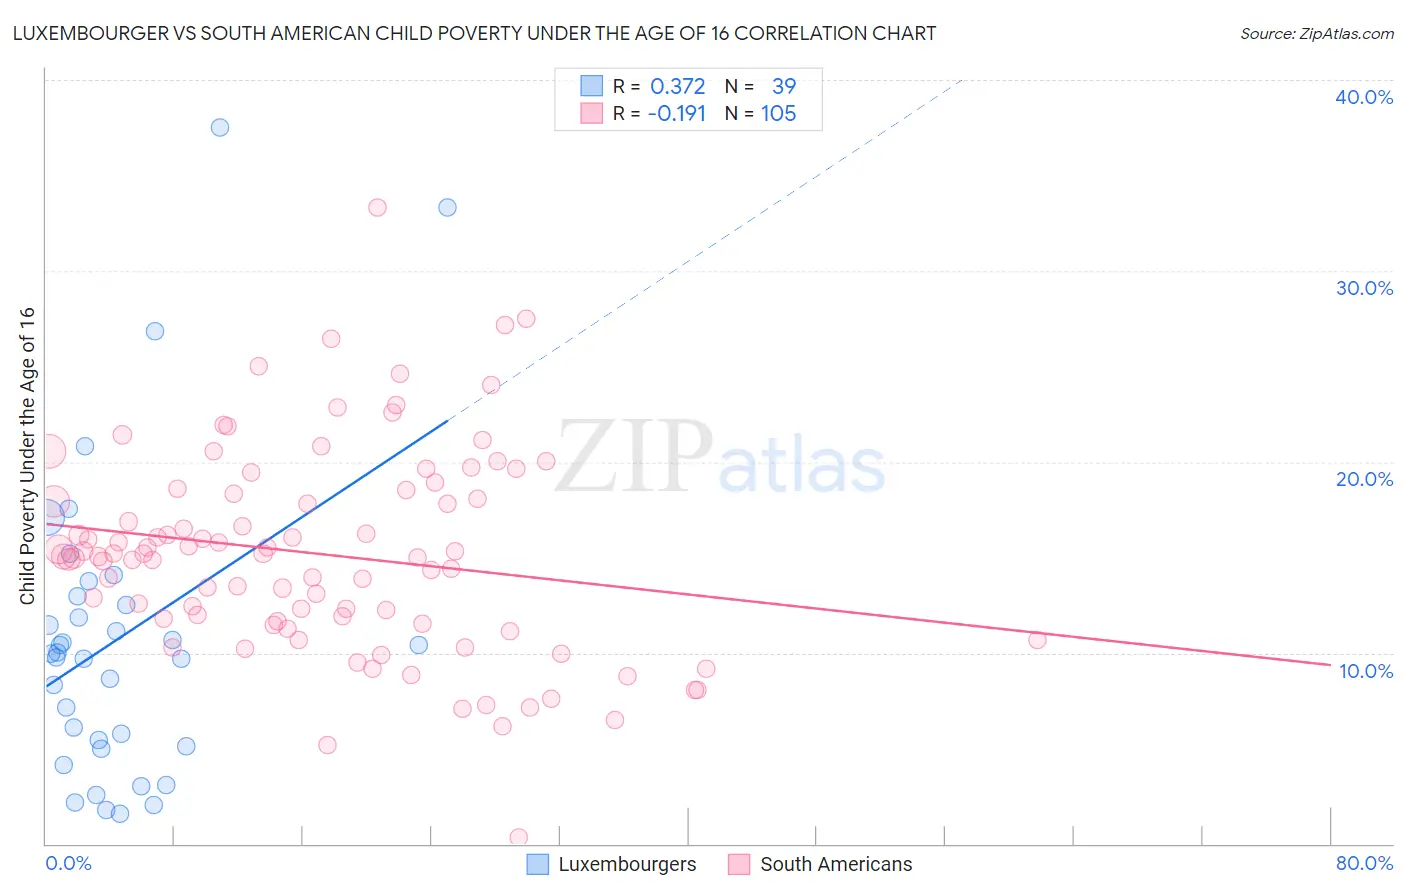 Luxembourger vs South American Child Poverty Under the Age of 16